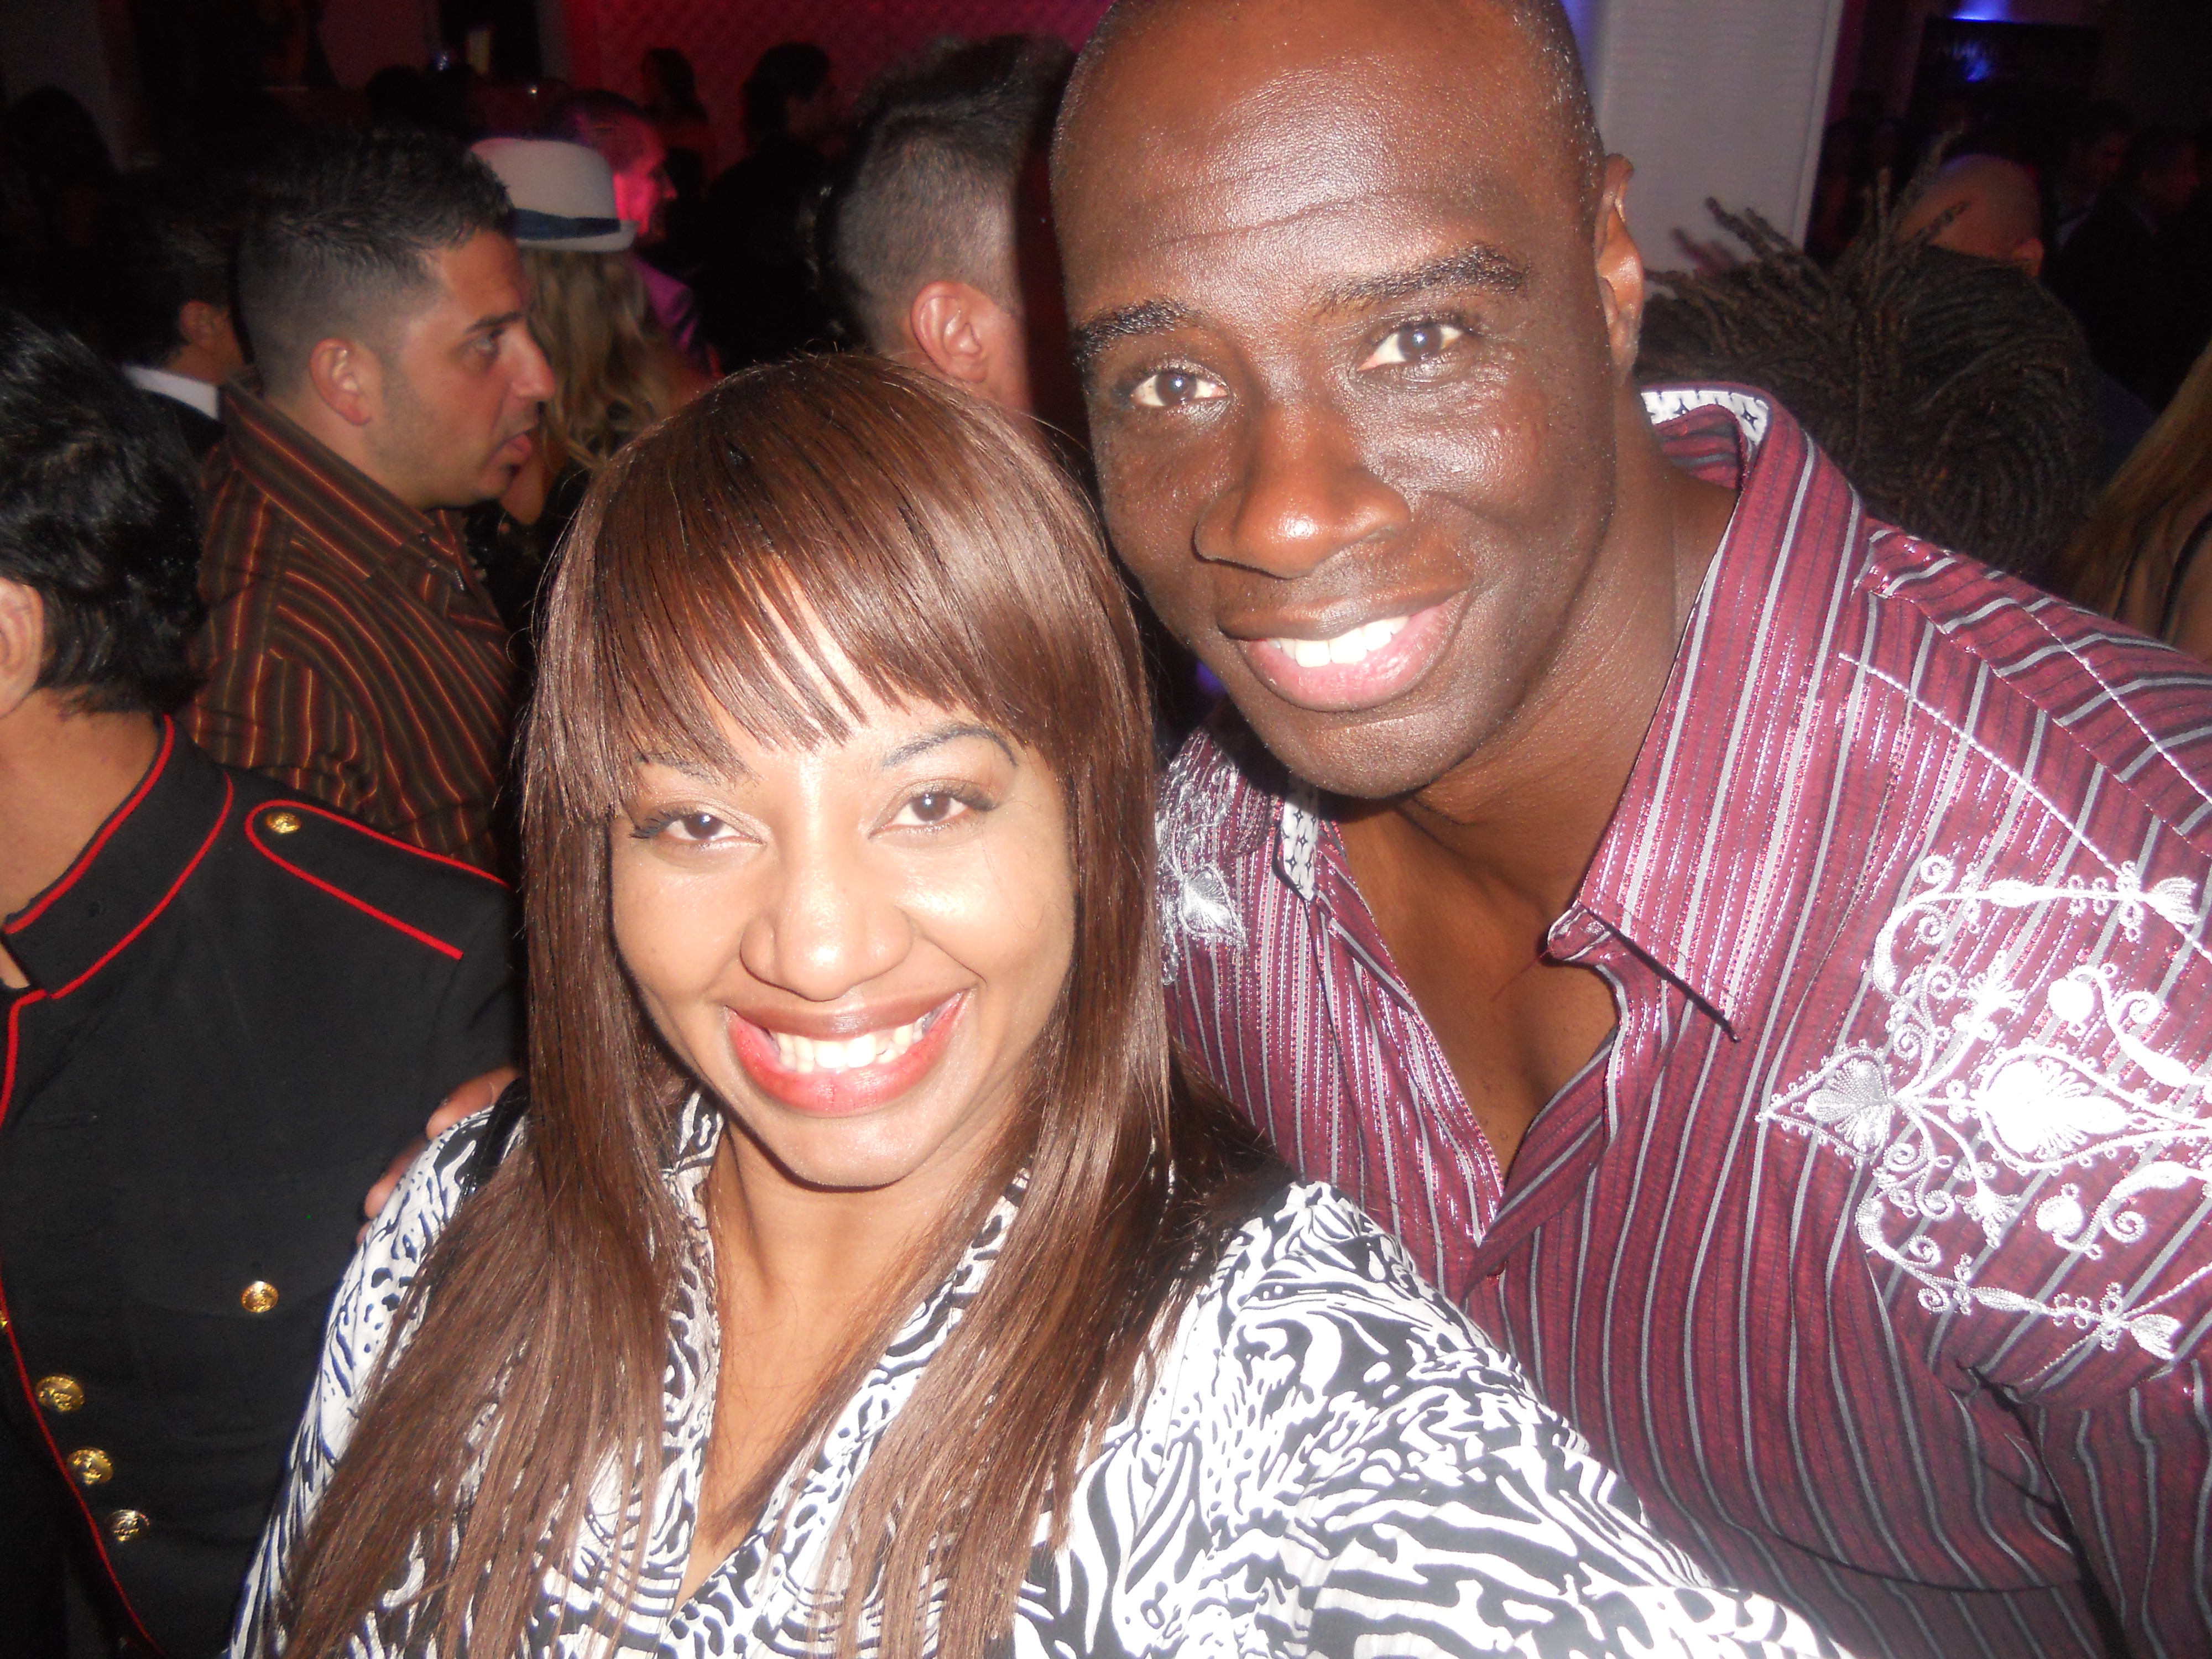 Nicole Denise Hodges attended a Magic Image fashion show in Beverly Hills,CA and met actor Isaac Singleton Jr.